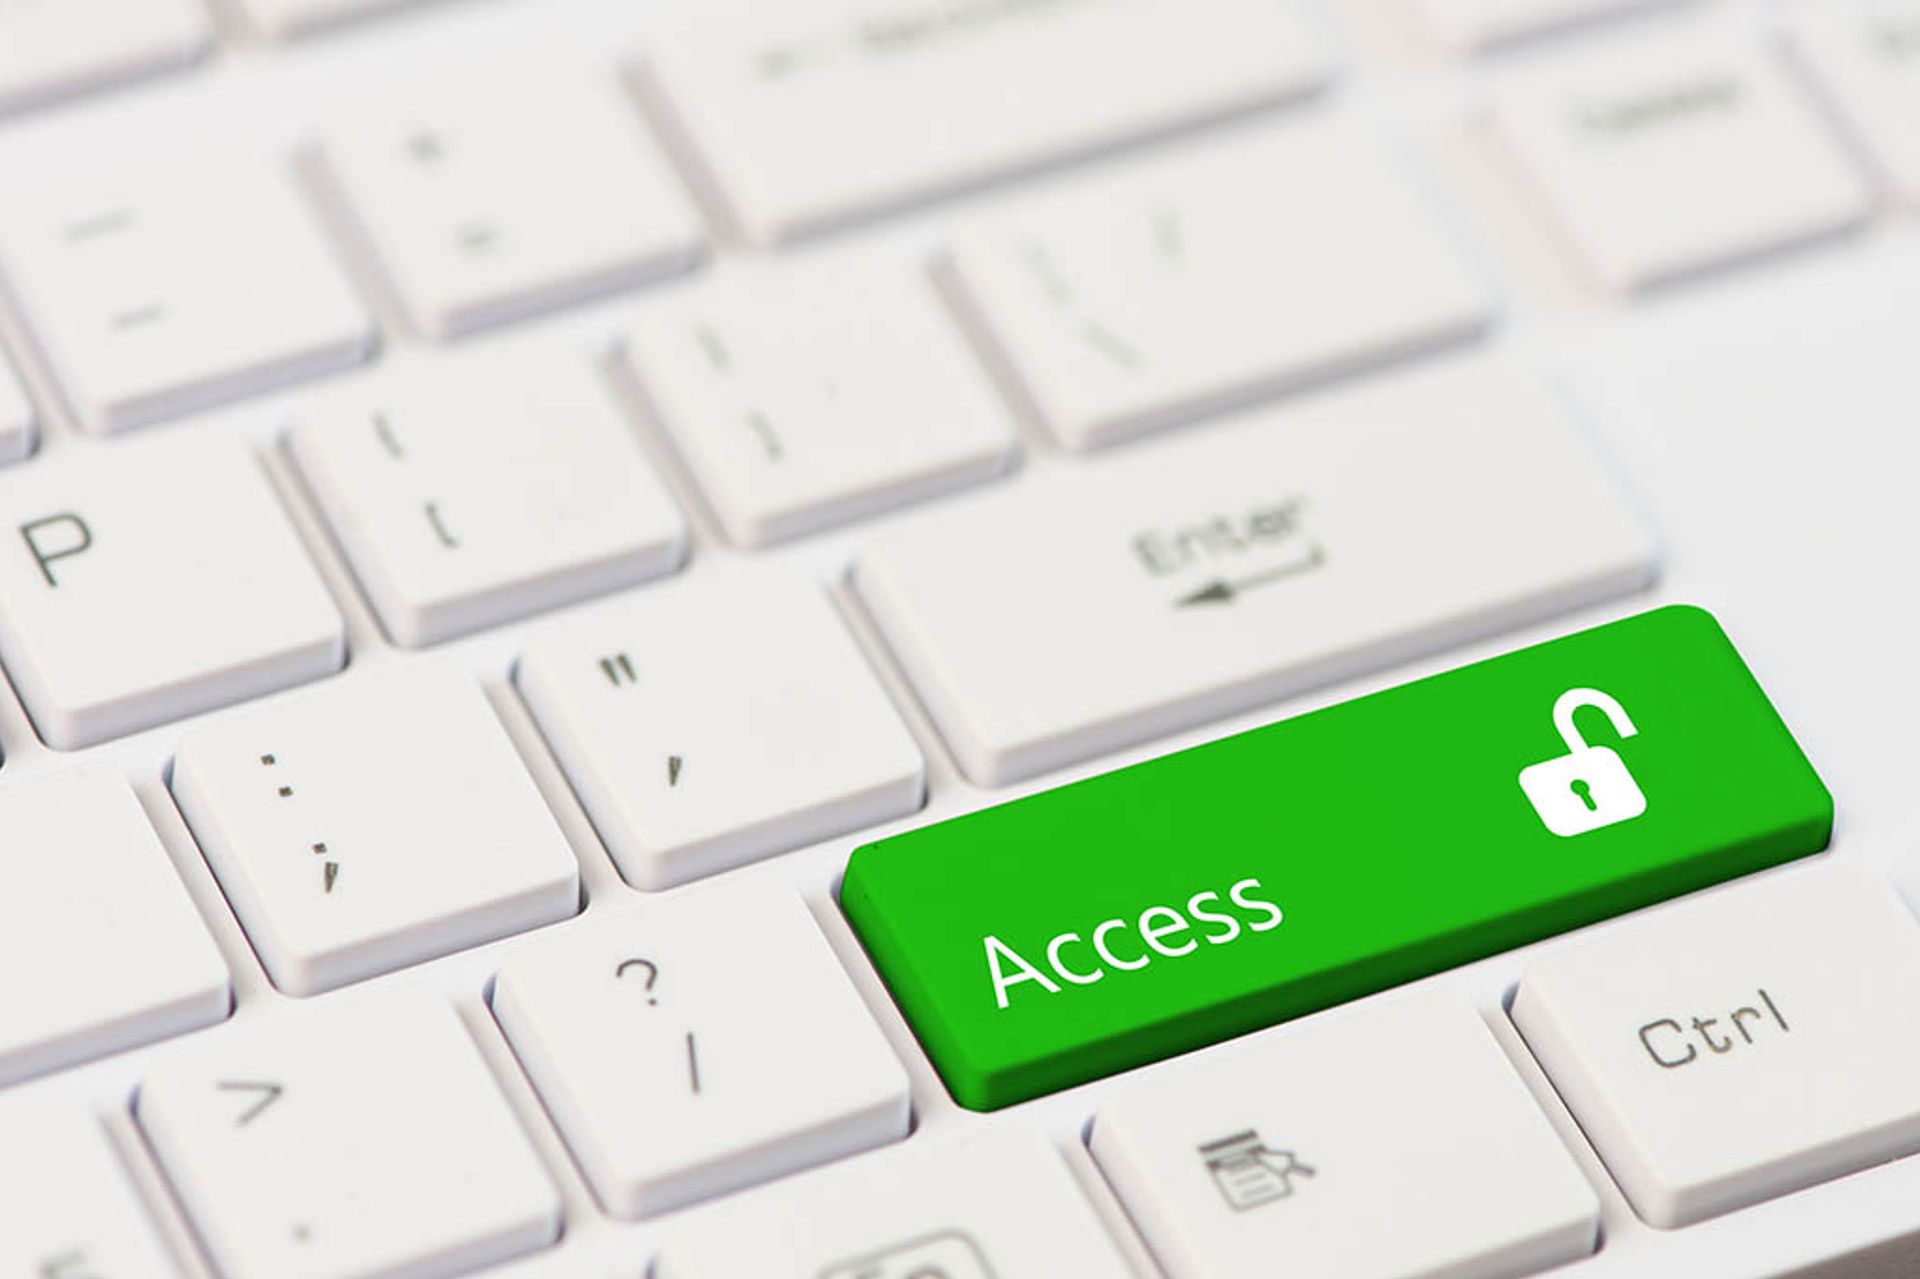 Image of keyboard with a green button stating “access” and an unlock symbol